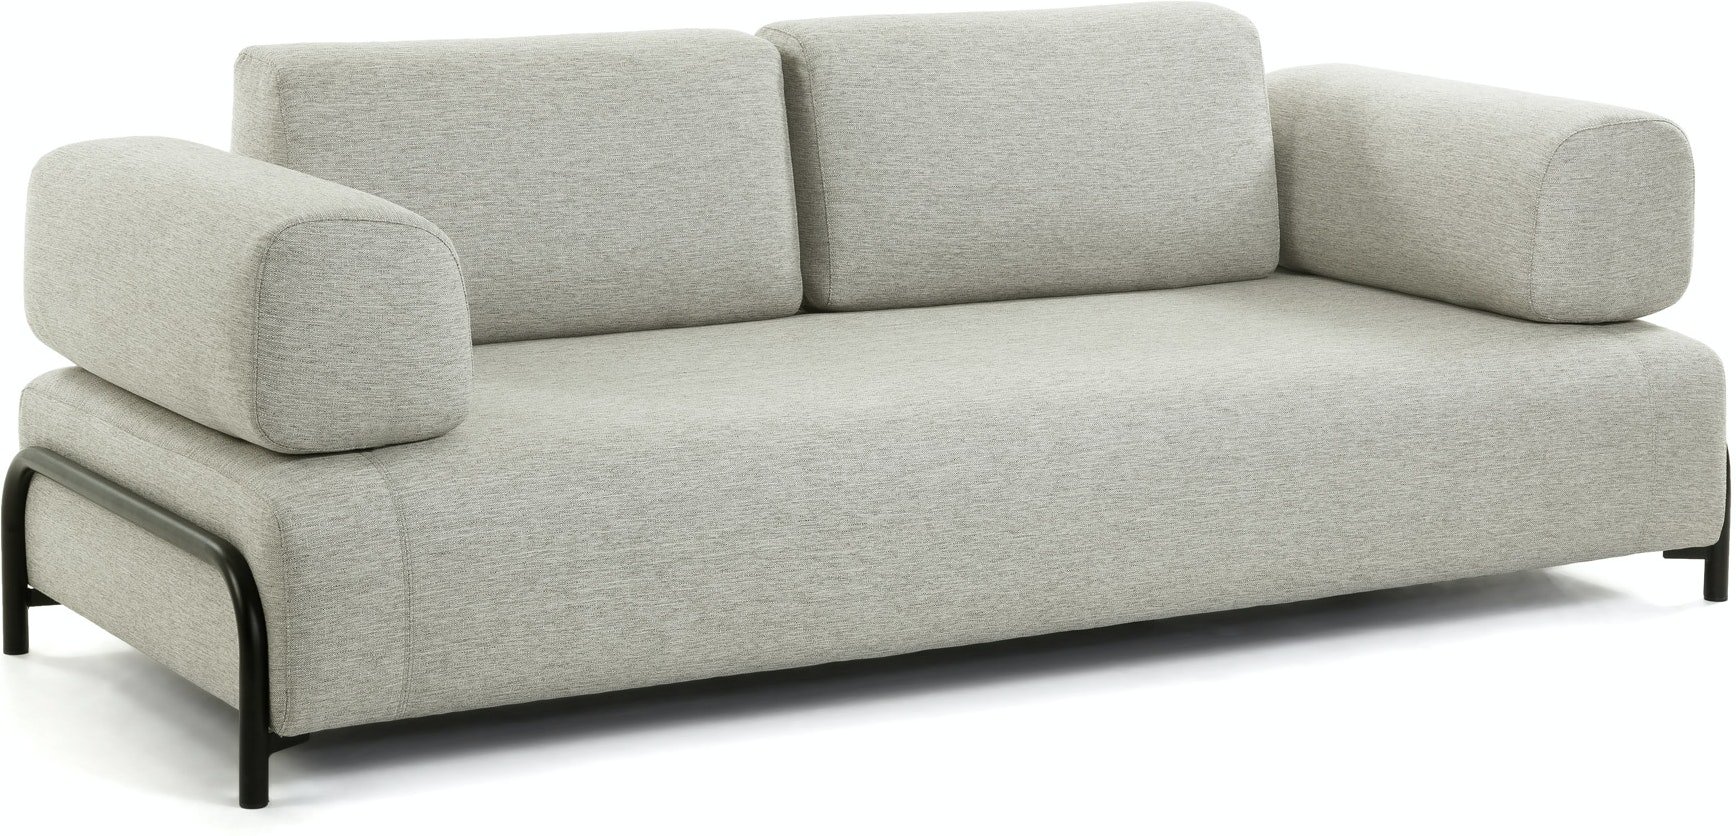 Compo, 3-personers sofa by Kave Home (Armlæn v/h, Beige)